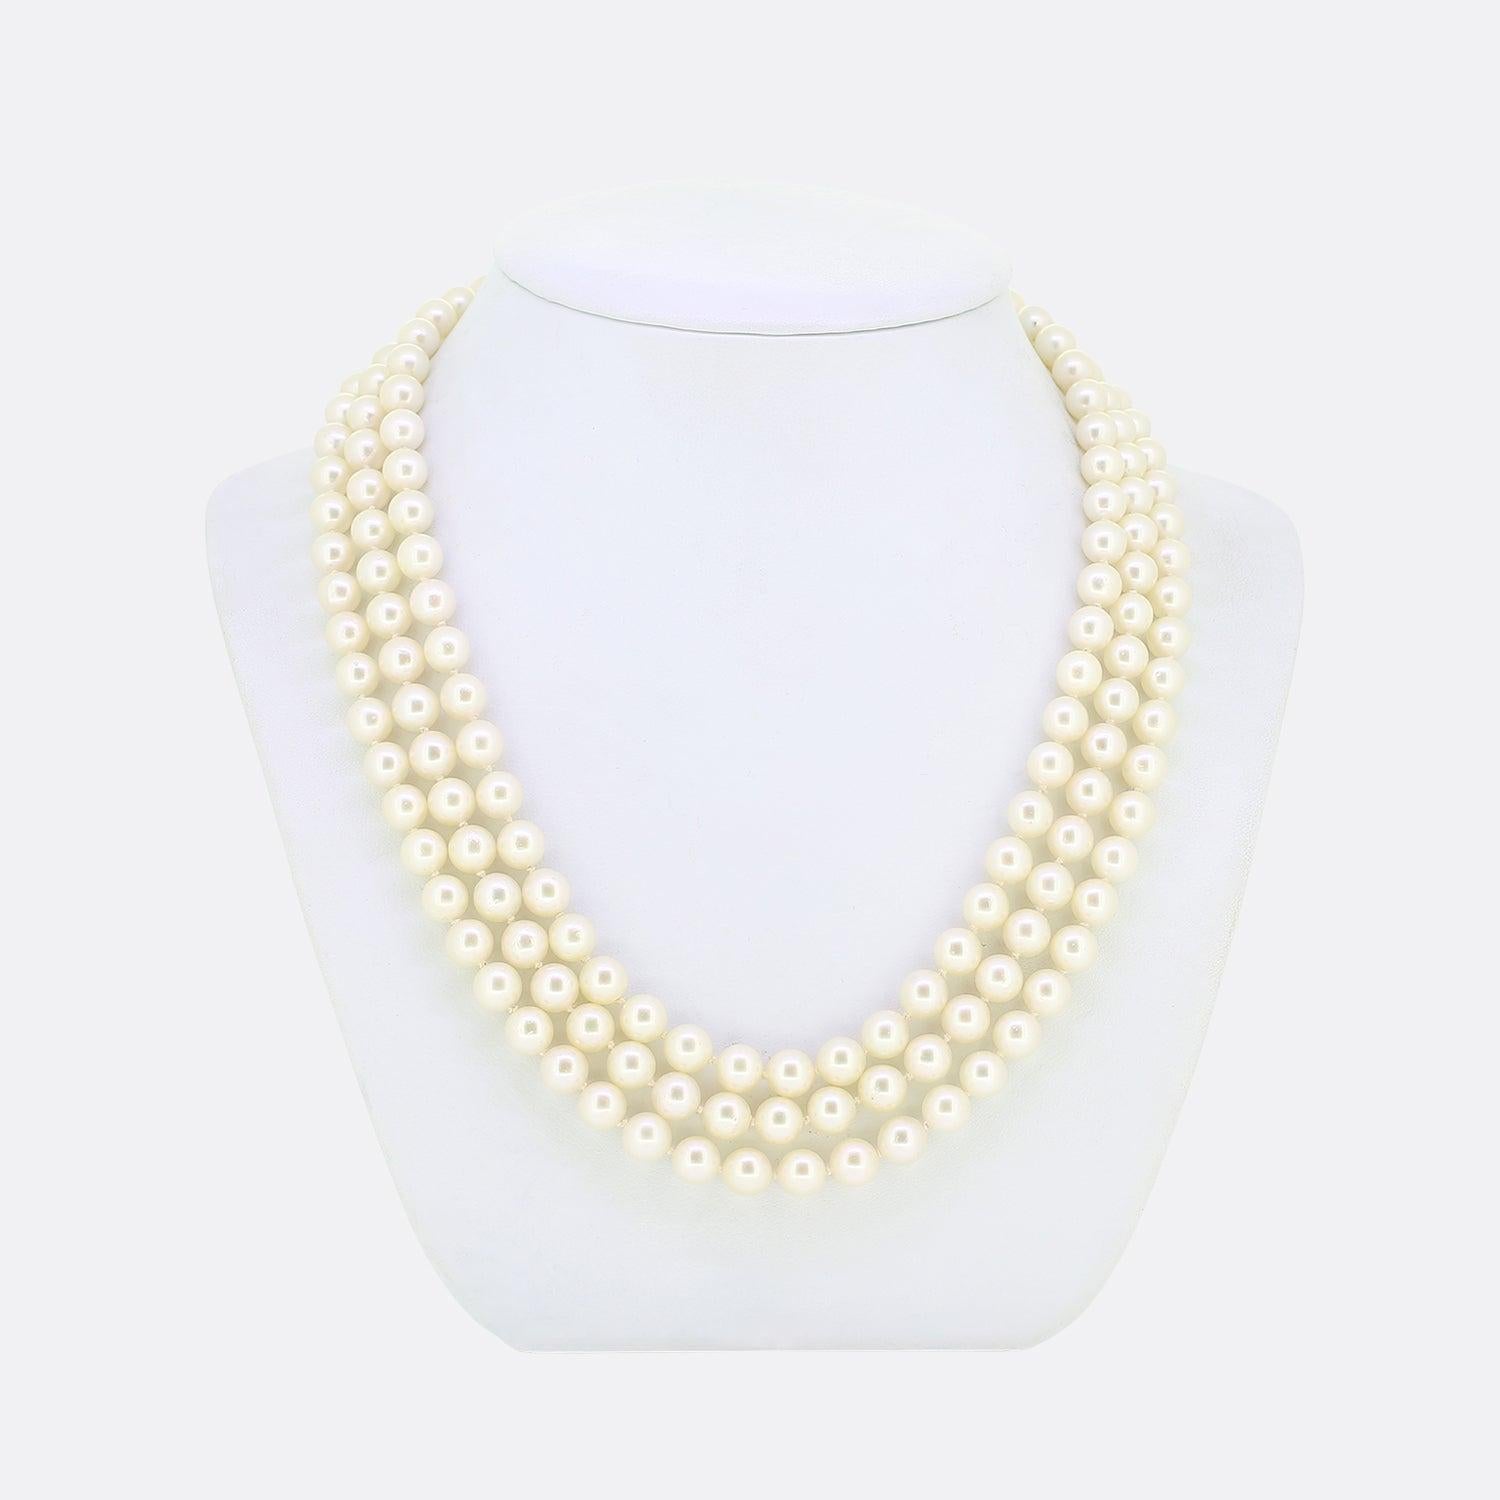 Here we have a stunning cultured pearl necklace. This vintage piece consists of three rows of individually knotted round shaped pearls; all of which are excellently matched in terms of size, presence and lustre. These wonderful stones are